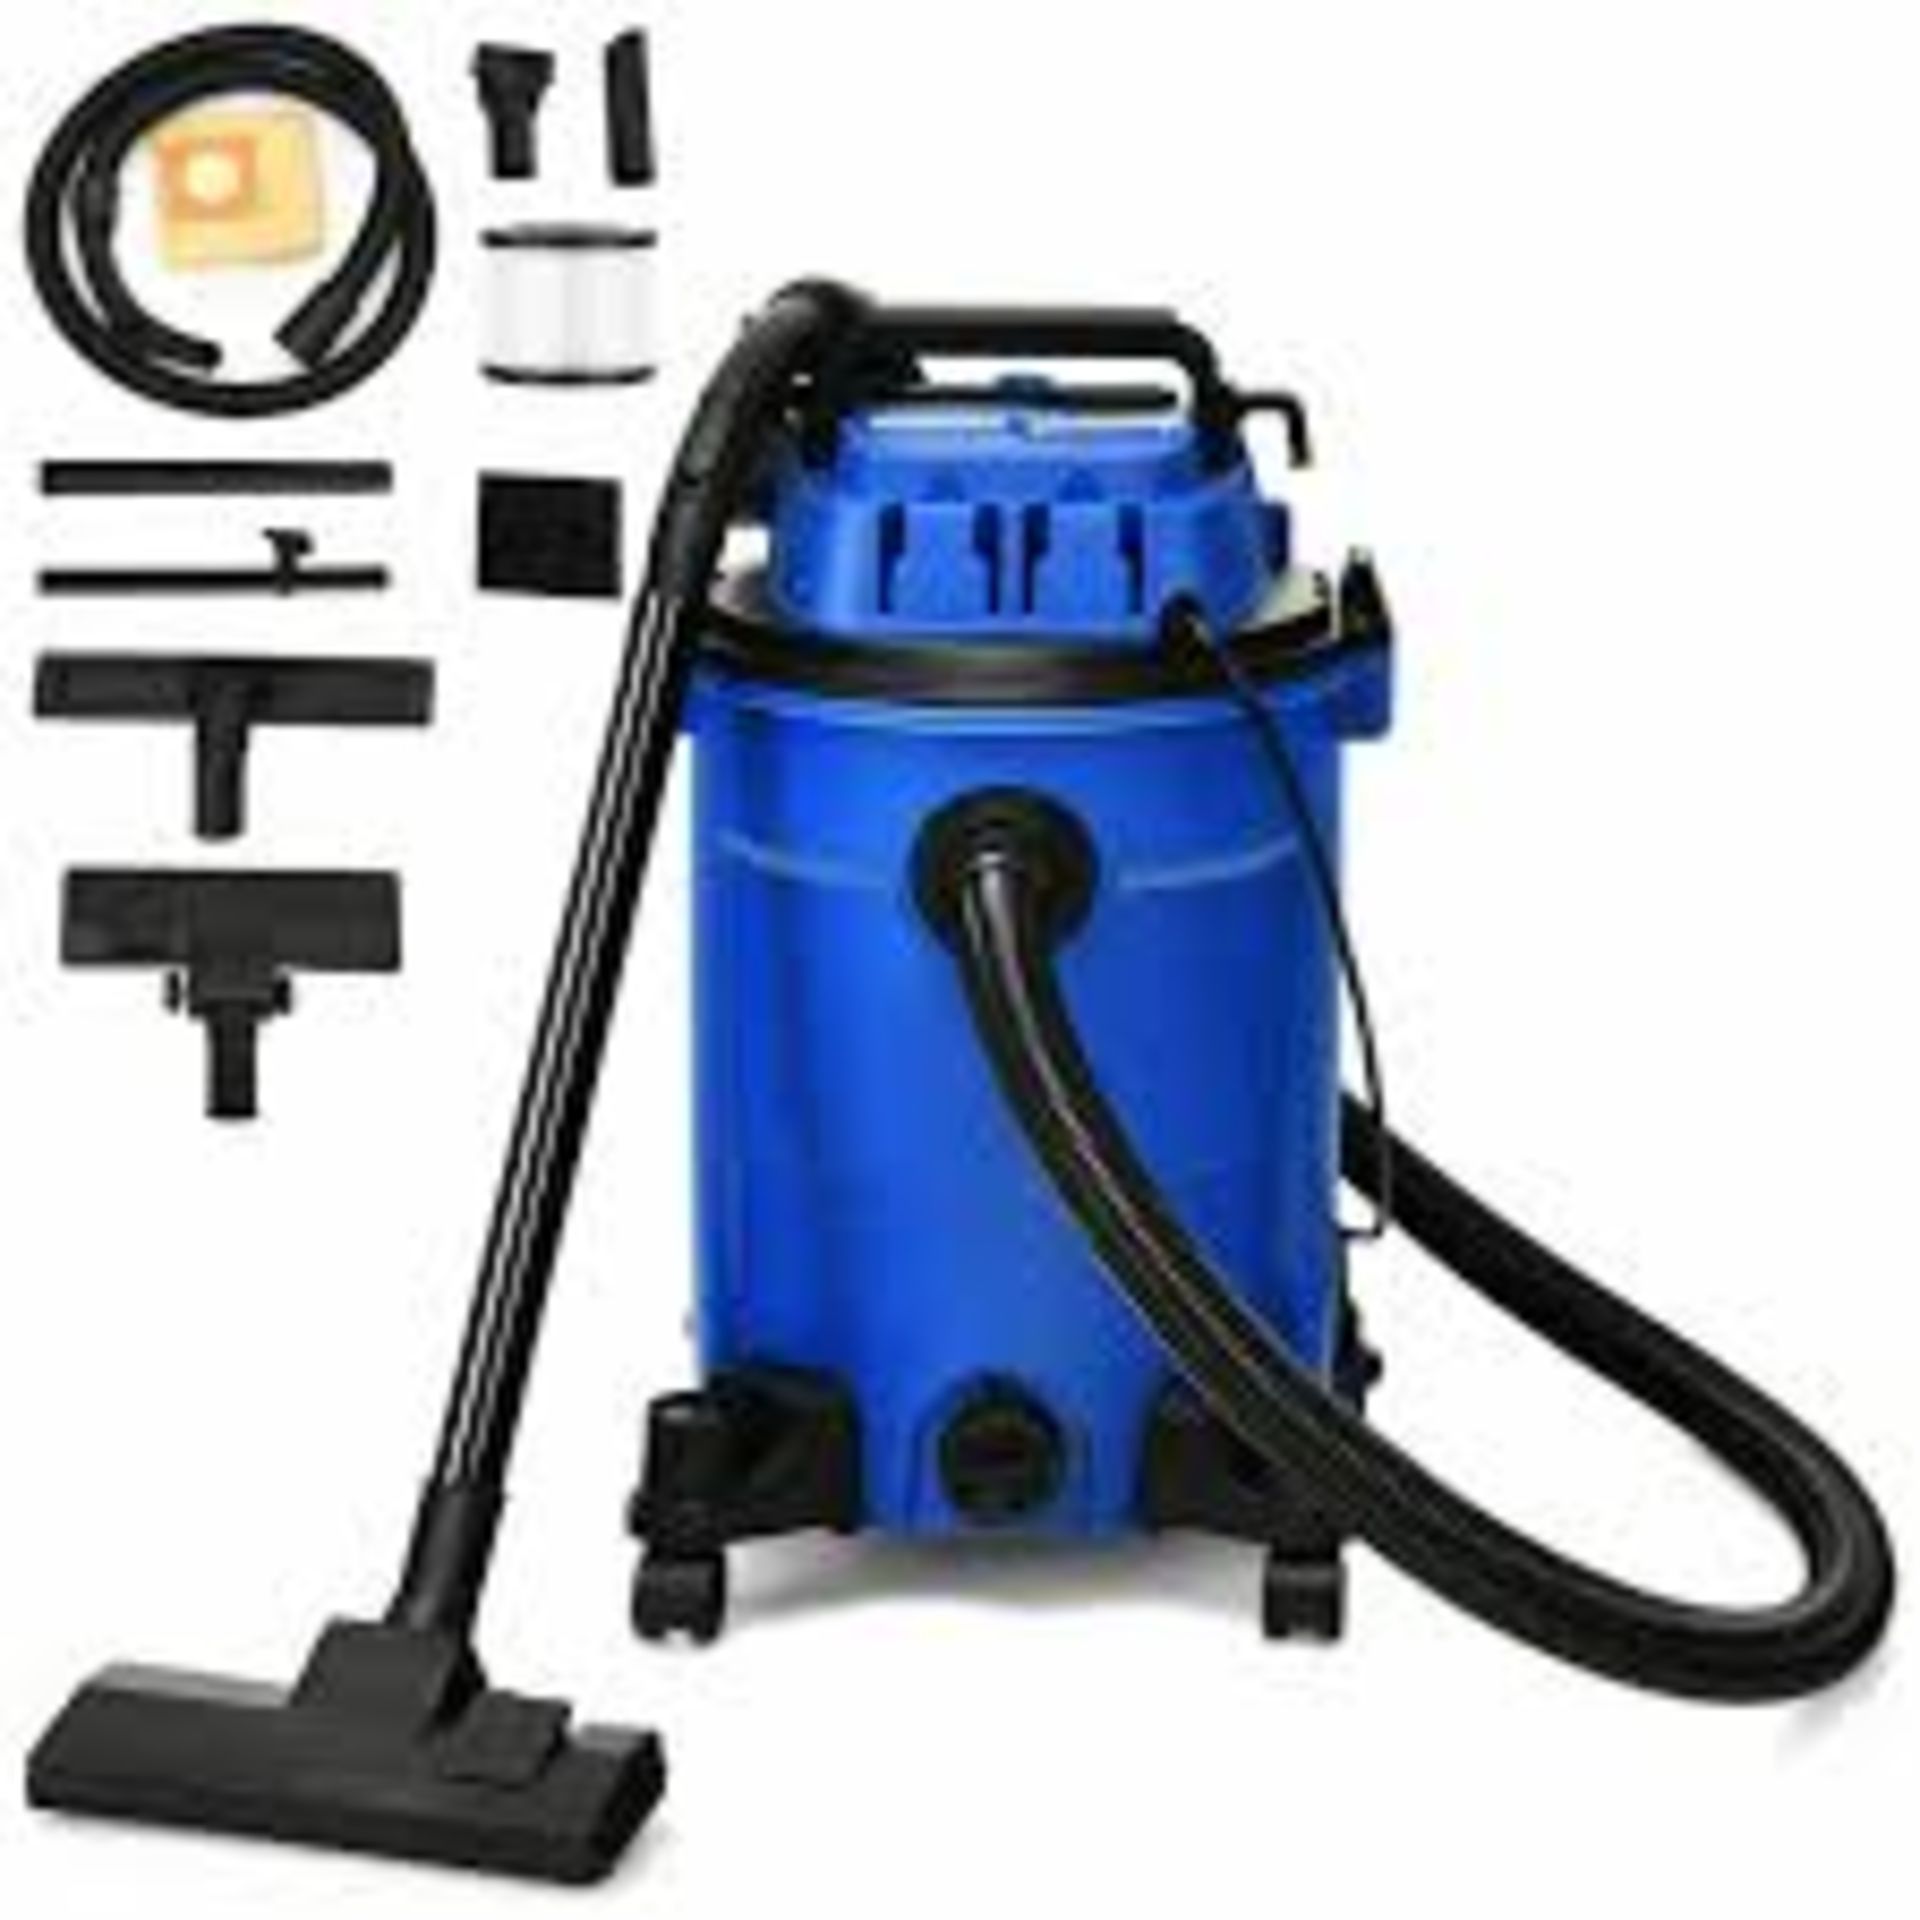 3 in 1 25L Handheld Suction Home Garage Cleaner Blue. - R13a.13.